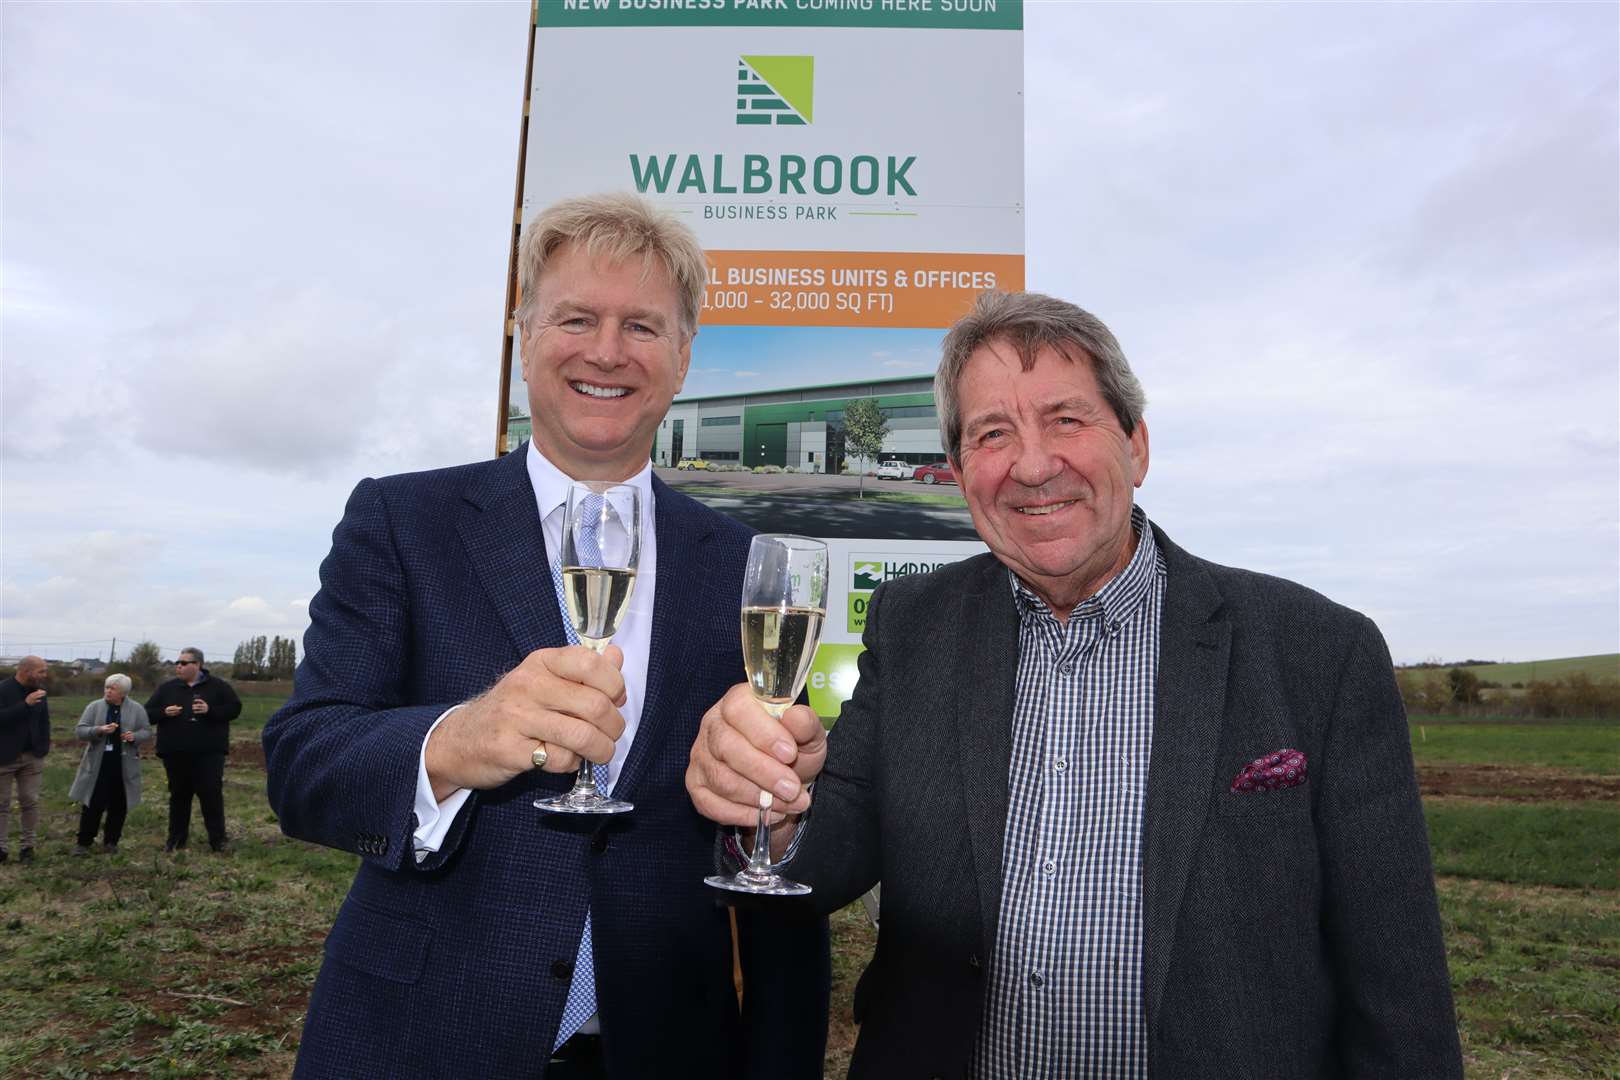 Tom Allsworth of Medichem, left, and MP Gordon Henderson toasting the launch of Walbrook Business Park at Neats Court, Queenborough